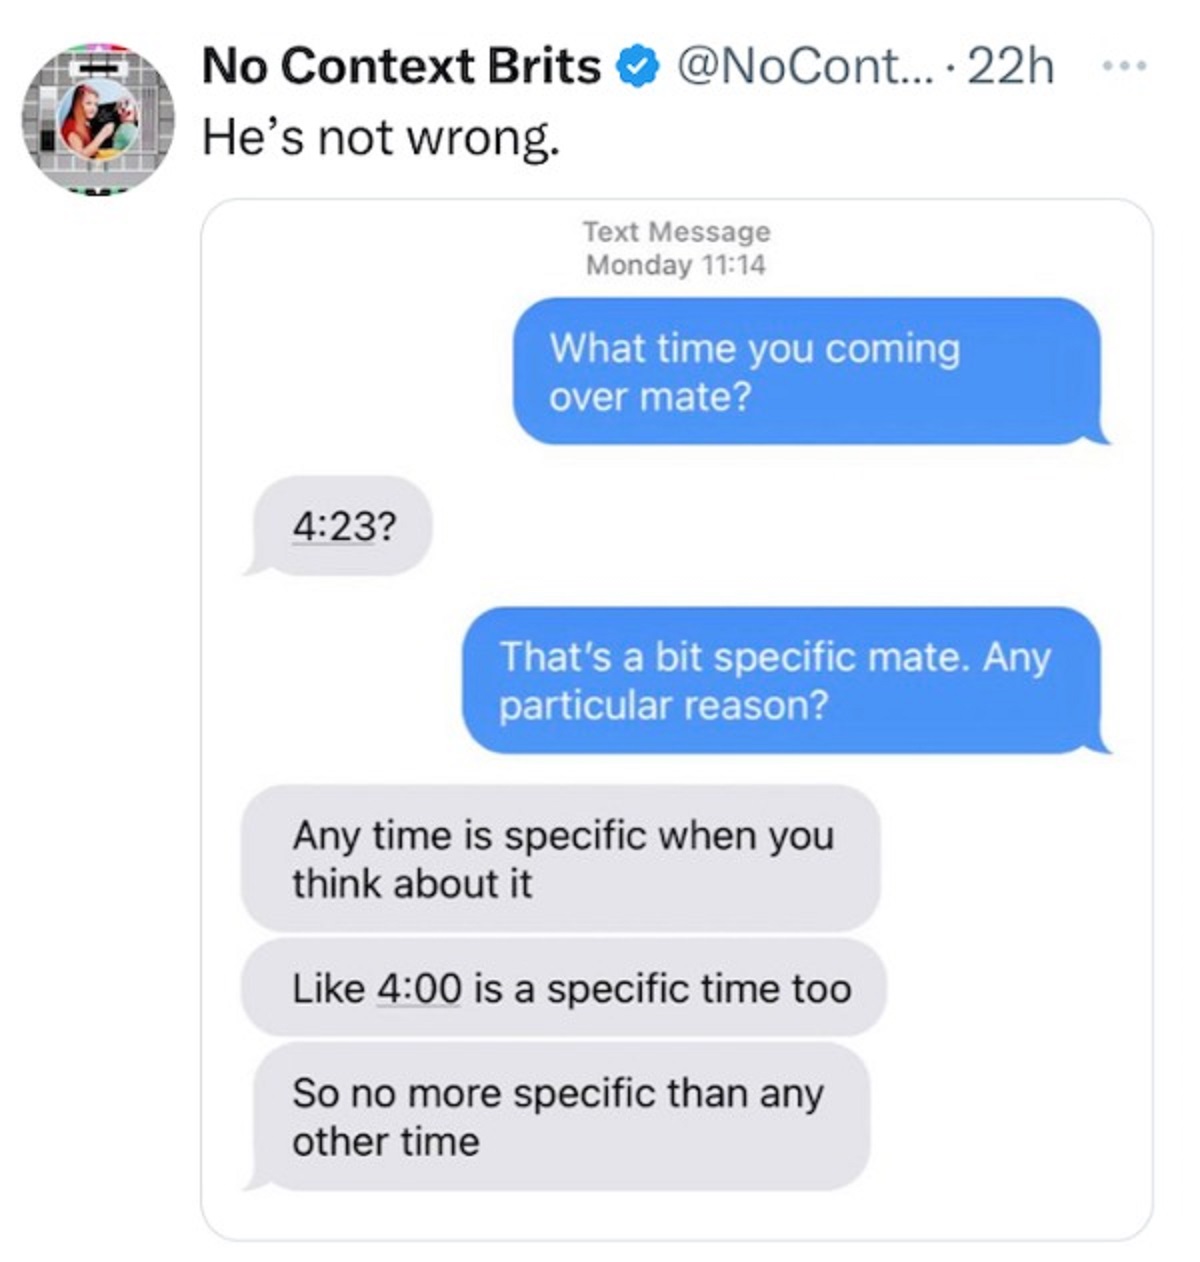 web page - No Context Brits He's not wrong. ? ... 22h Text Message Monday What time you coming over mate? That's a bit specific mate. Any particular reason? Any time is specific when you think about it is a specific time too So no more specific than any o